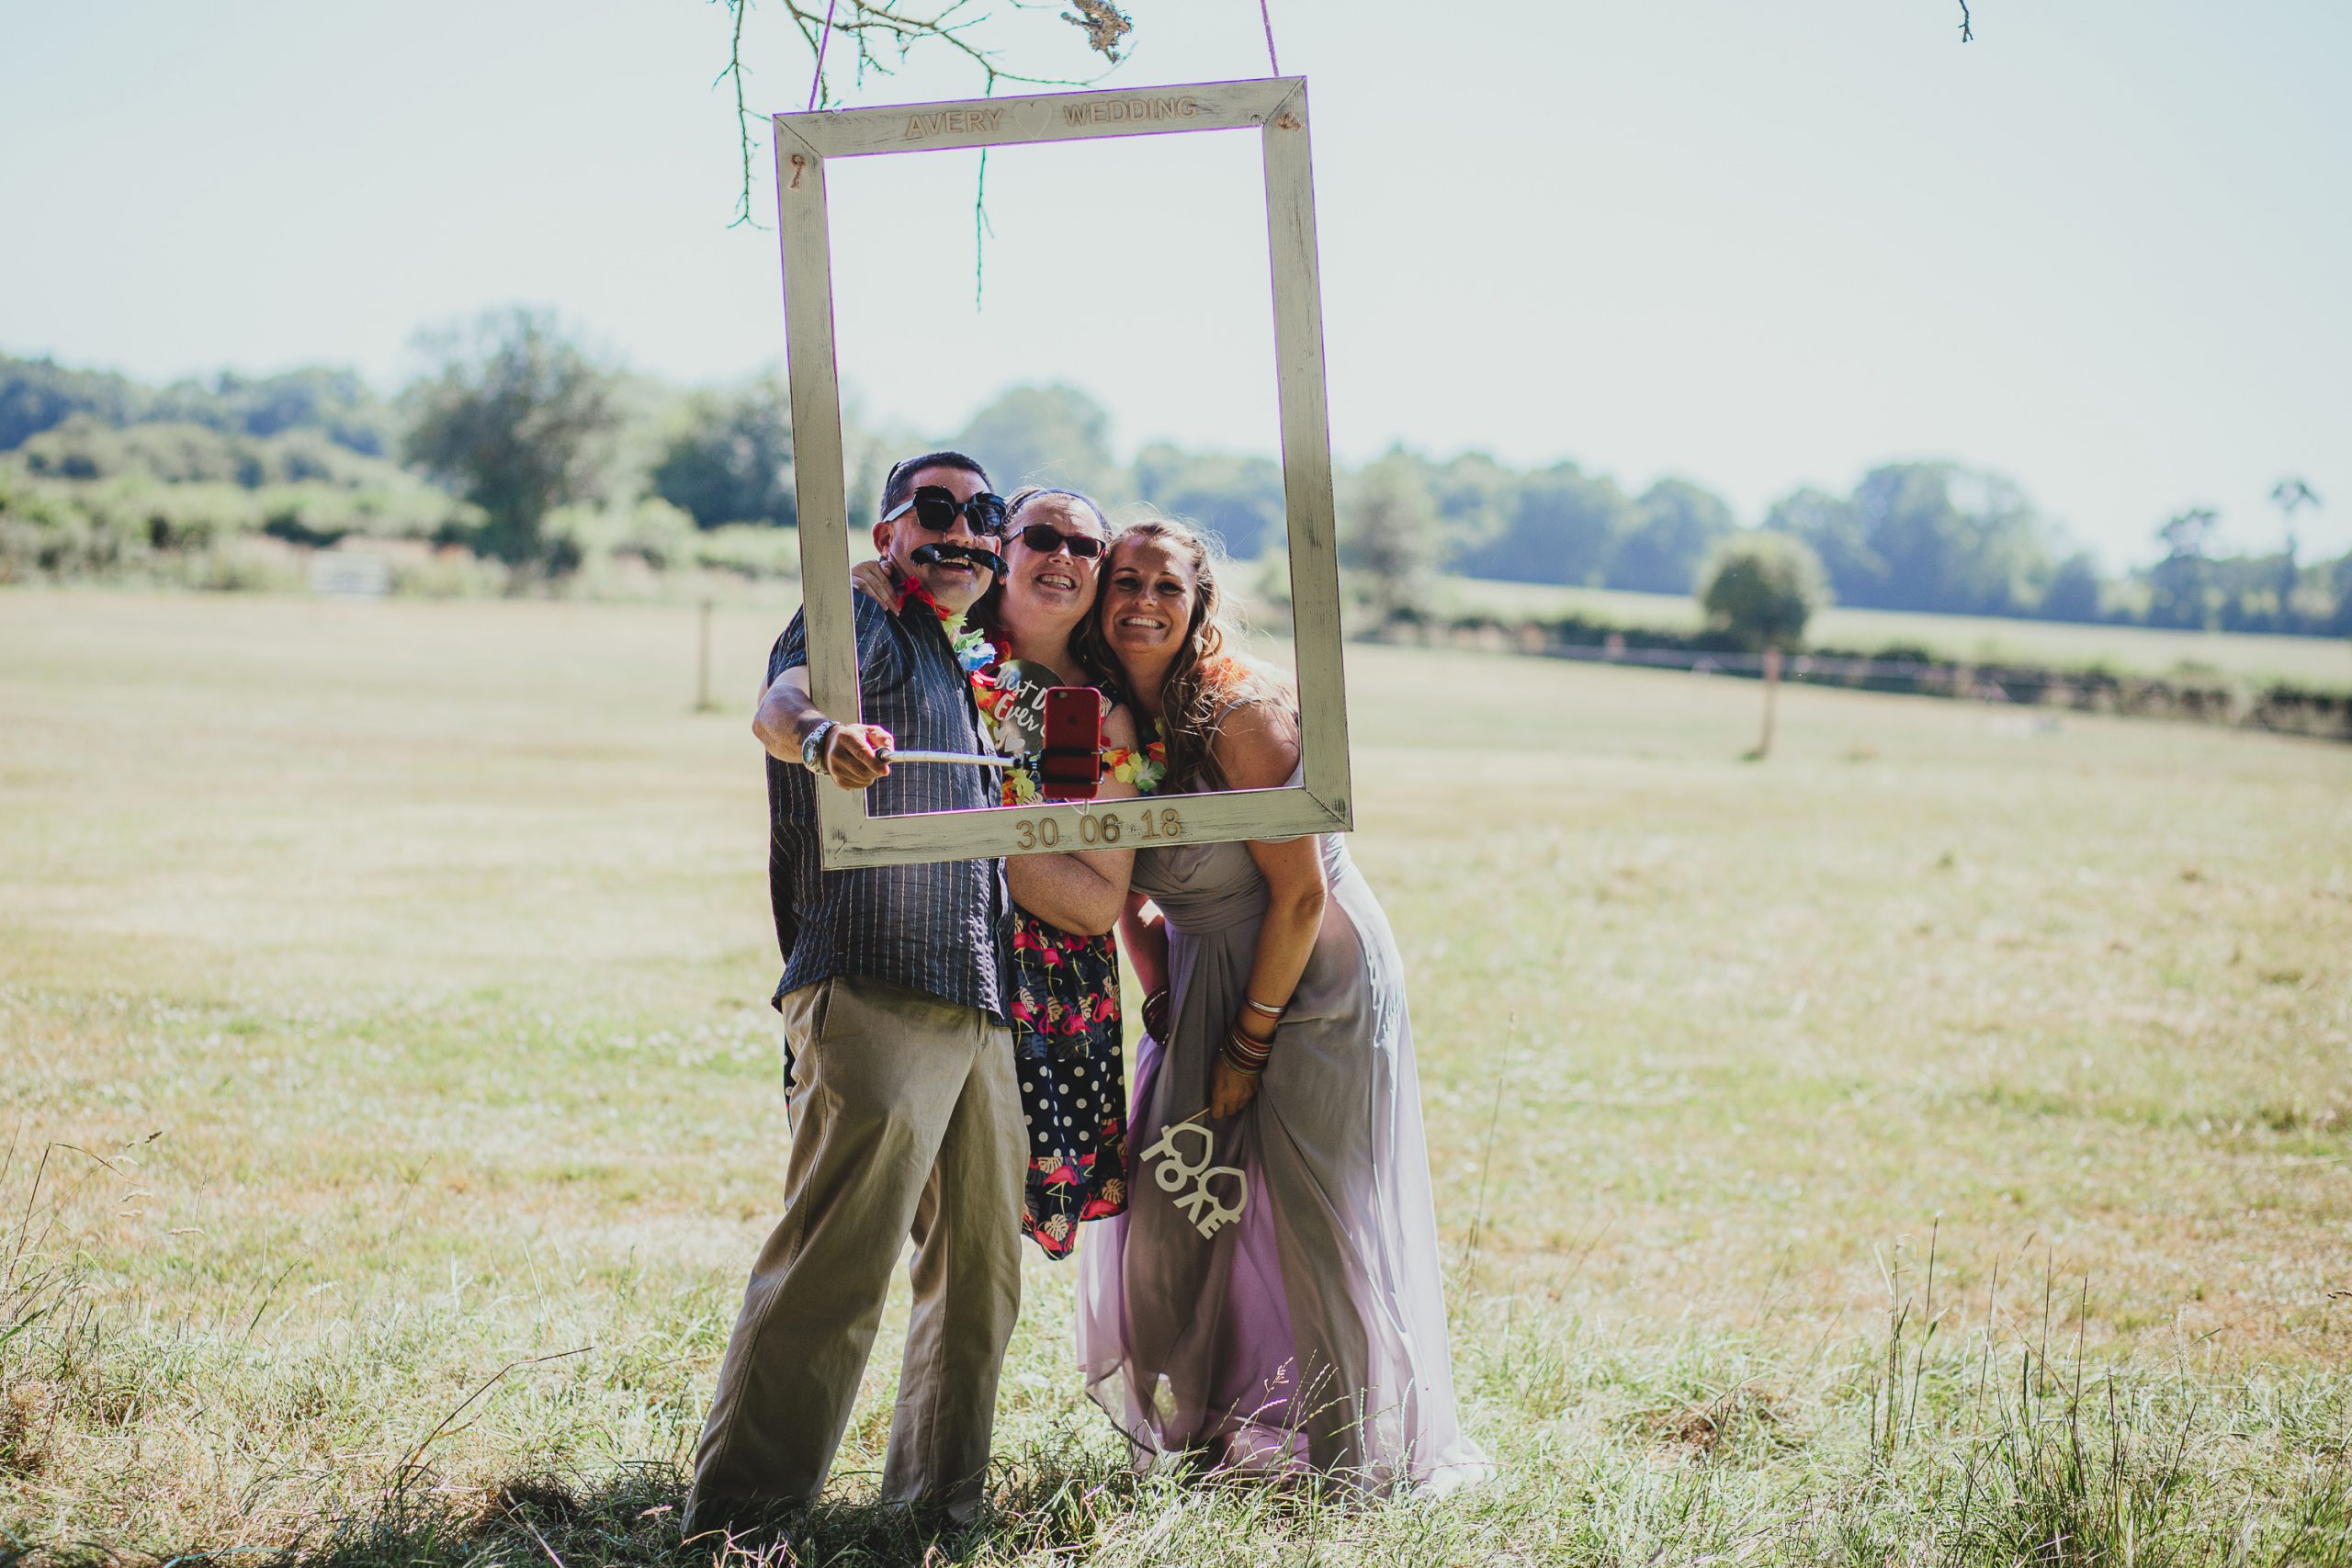 guests at outdoor photo booth at festival, boho wedding